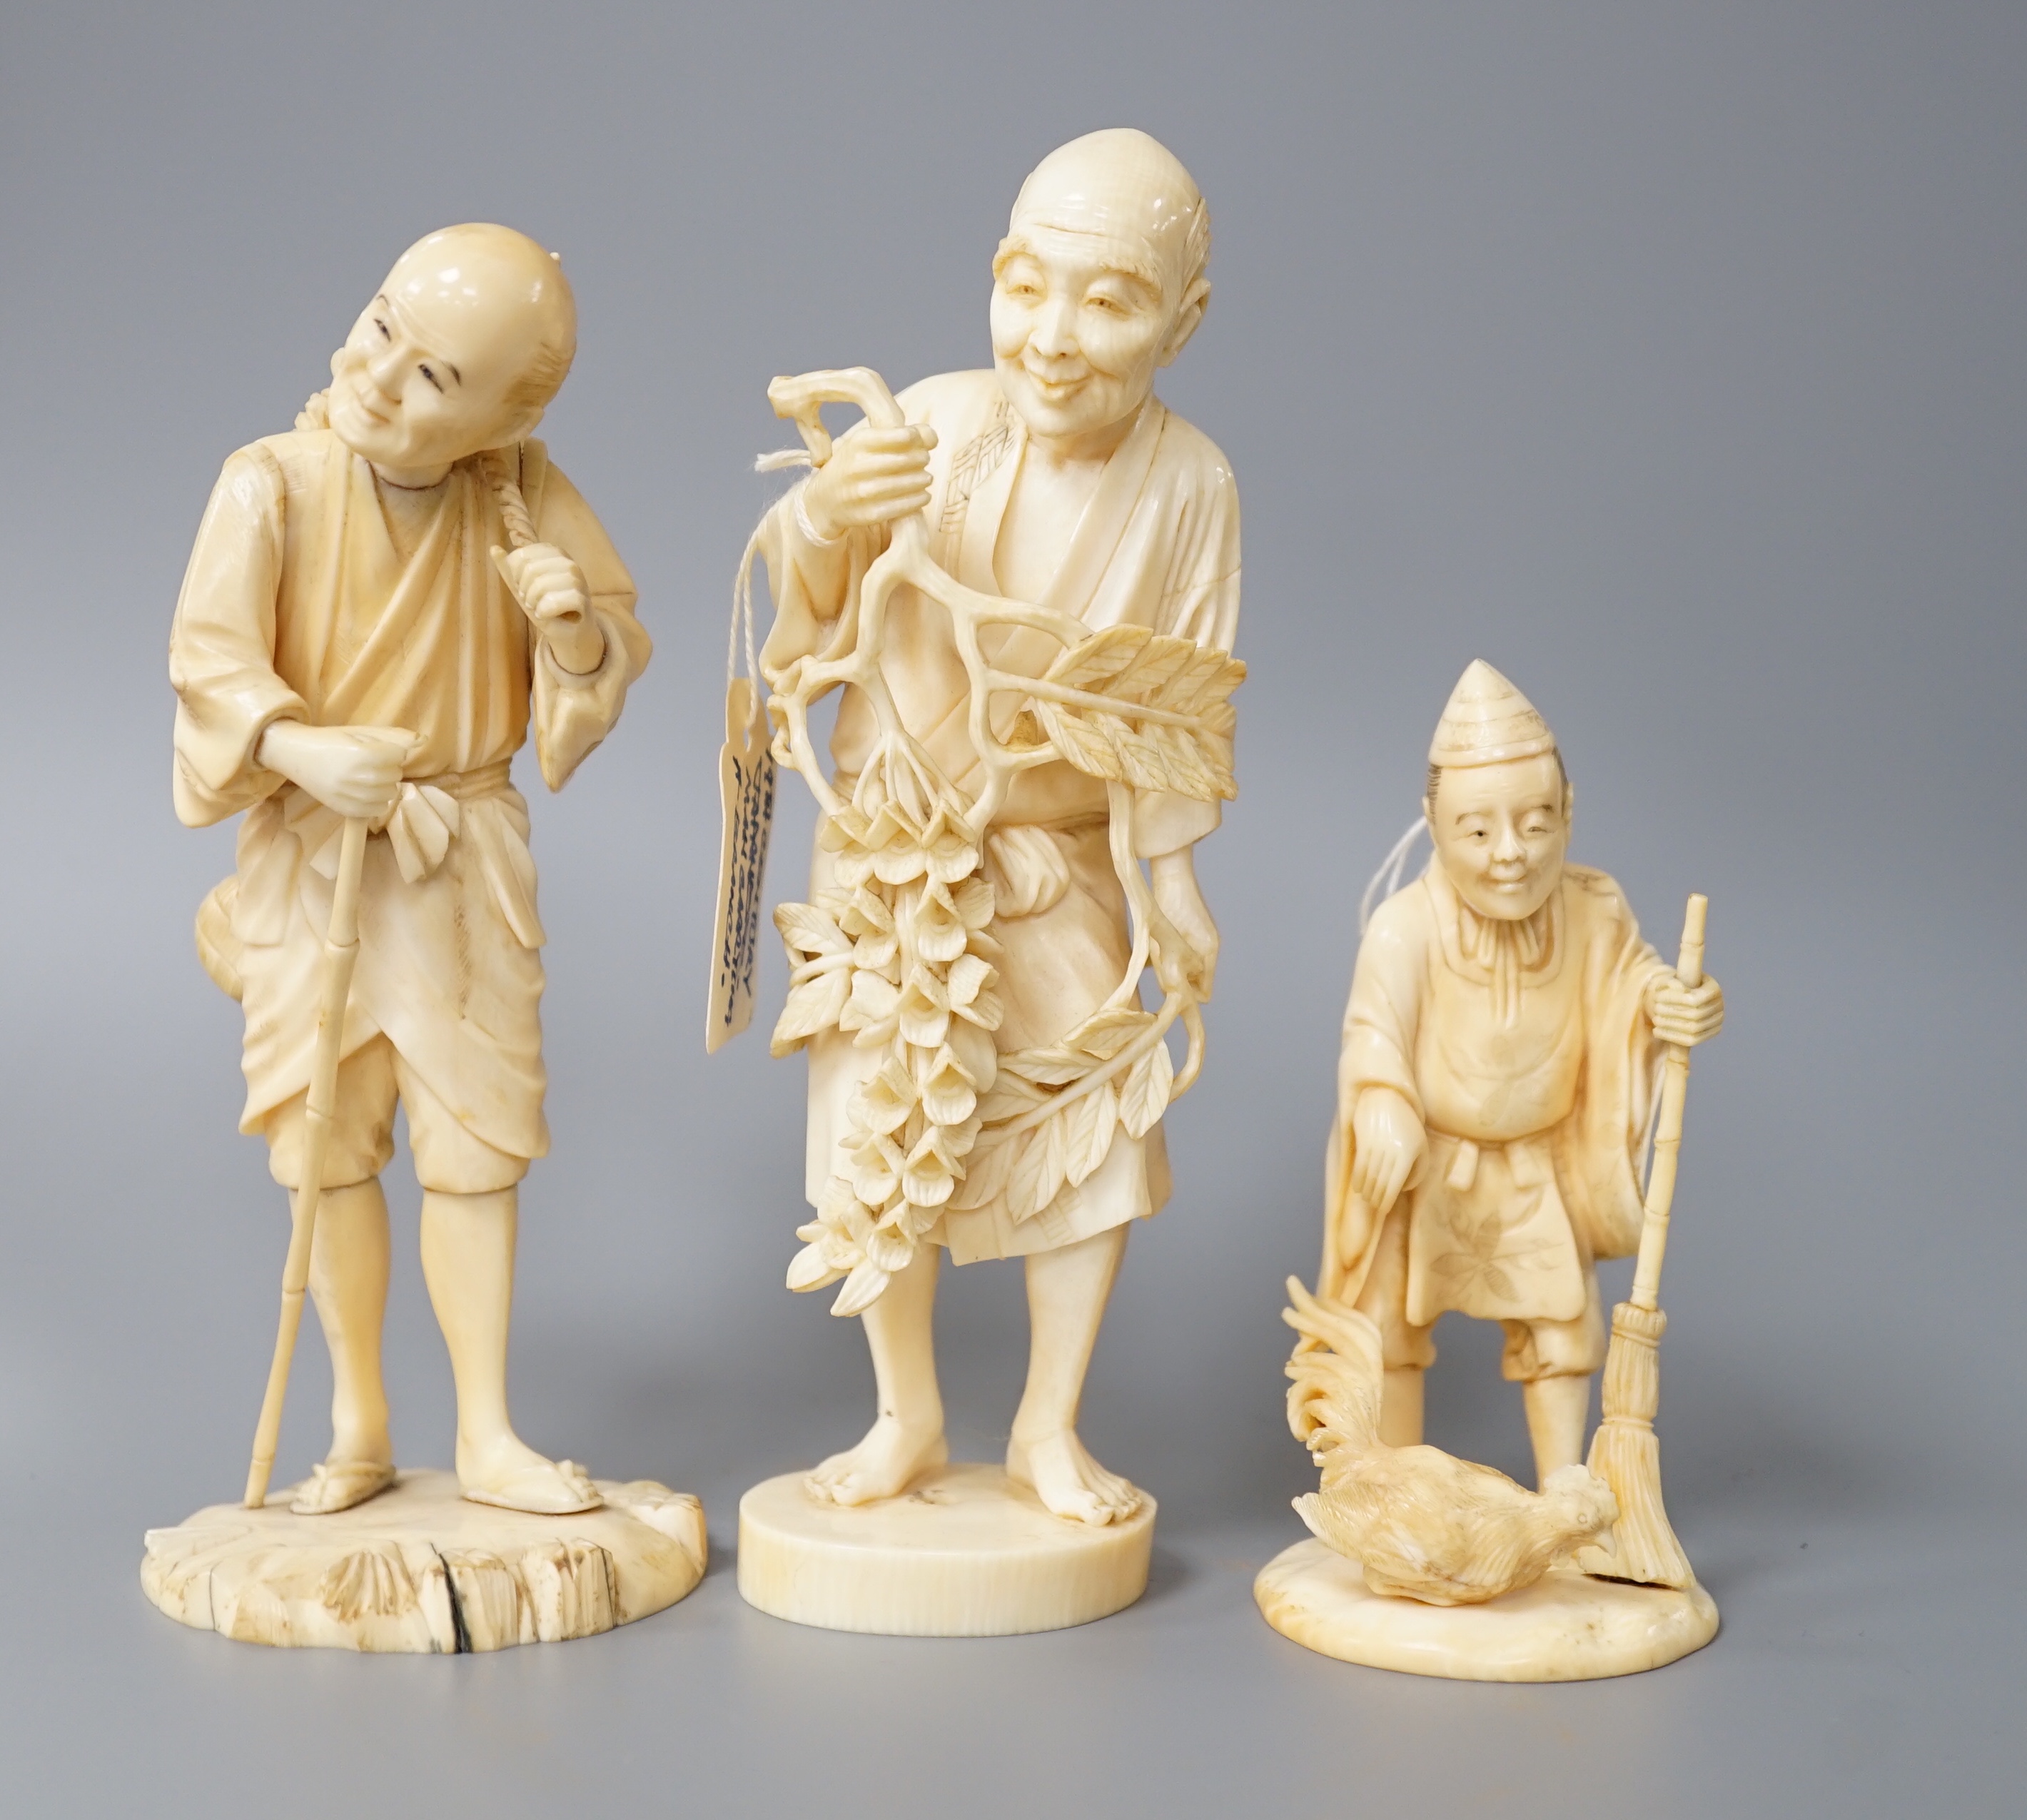 A 19th century Japanese ivory okimono of a gentleman holding a branch, another sectional figure of a gentleman with a walking stick, both signed and another 20th century okimono. Tallest 15.5cm